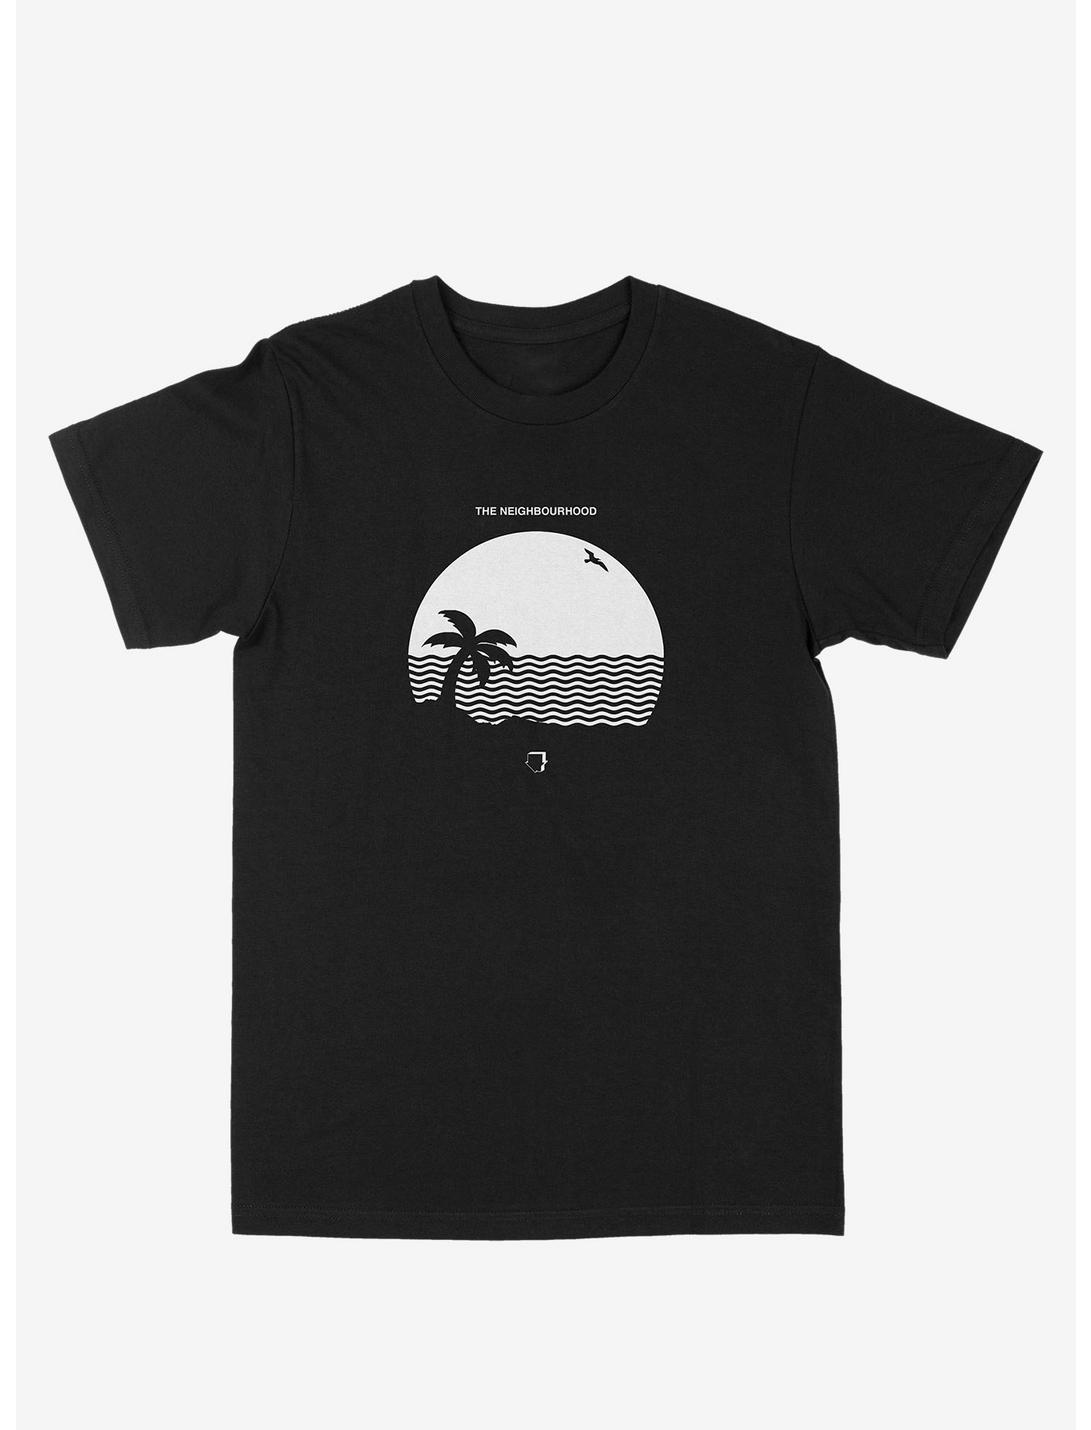 The Neighbourhood Wiped Out! T-Shirt, BLACK, hi-res